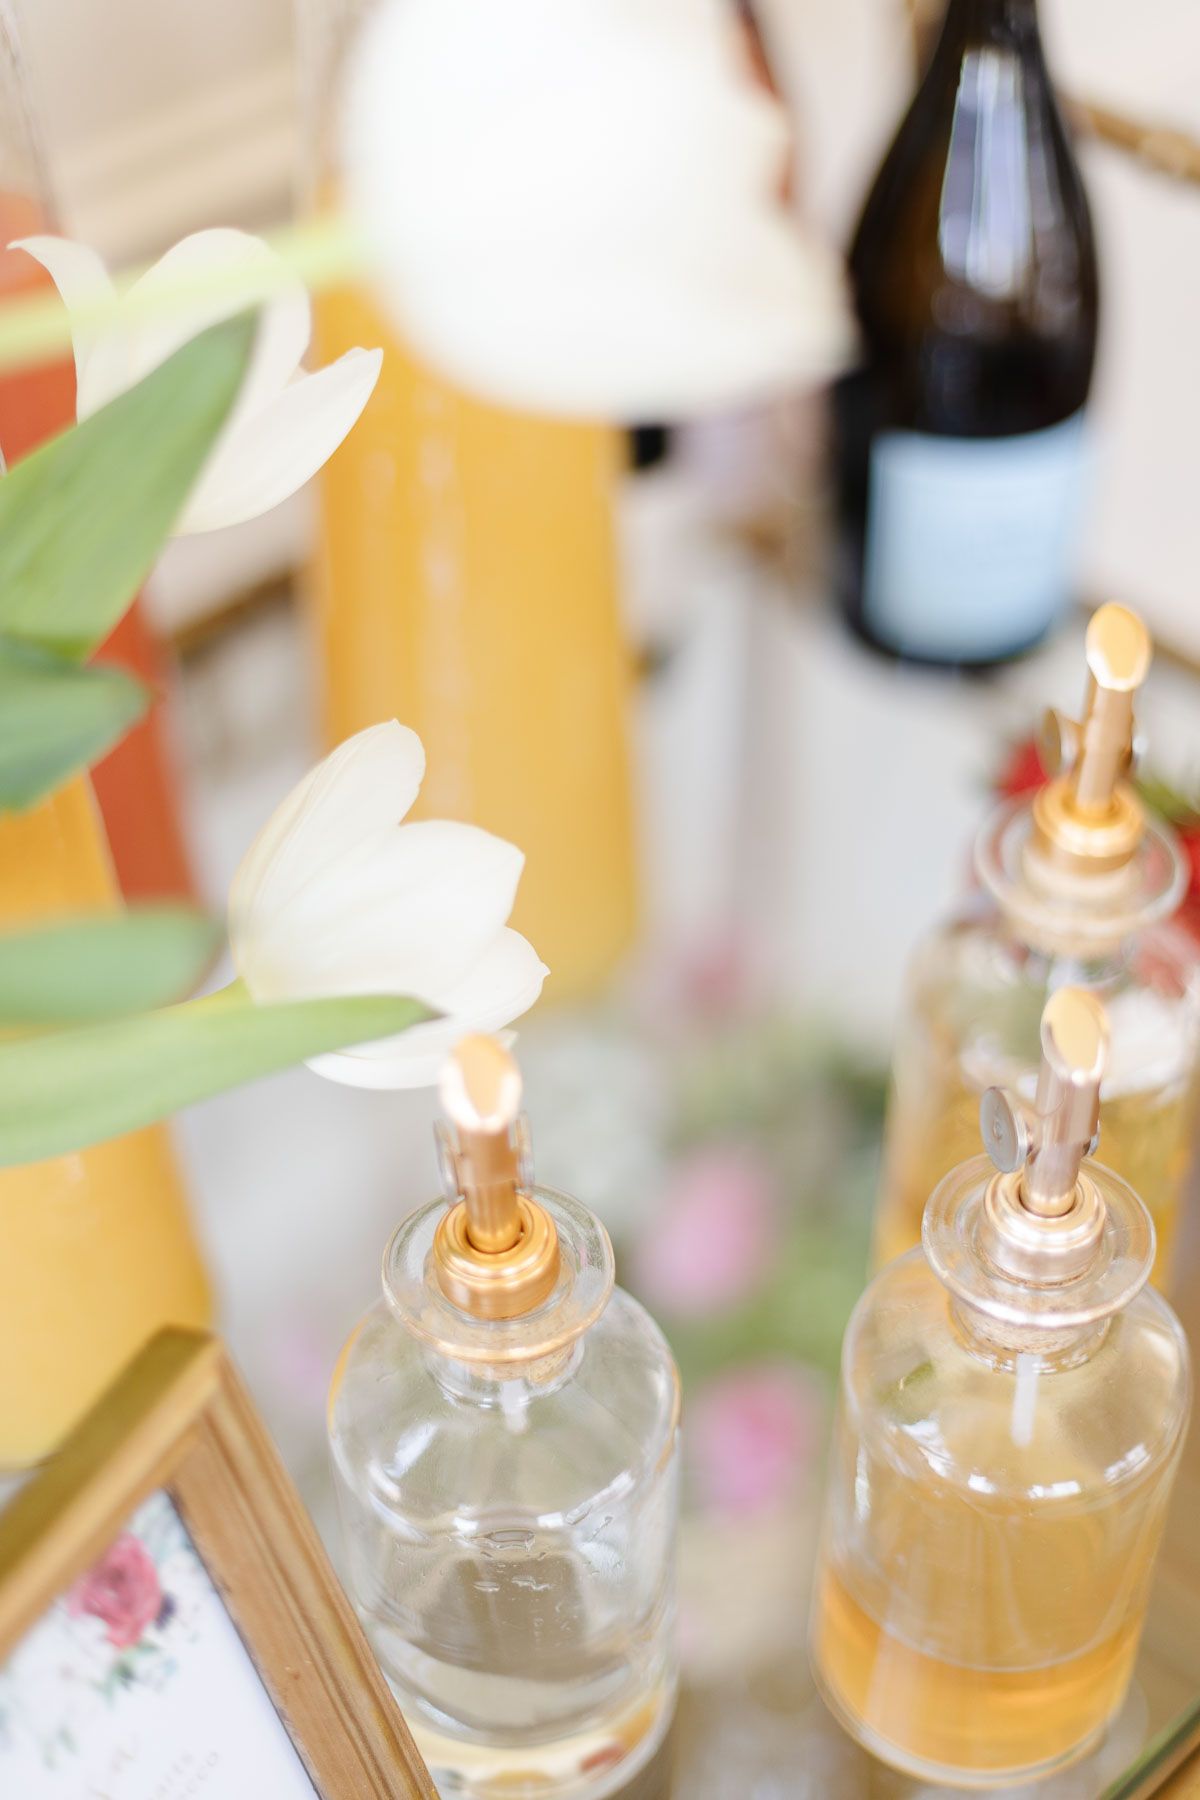 mimosa bar ideas with white tulips and fresh juices in glass bottles